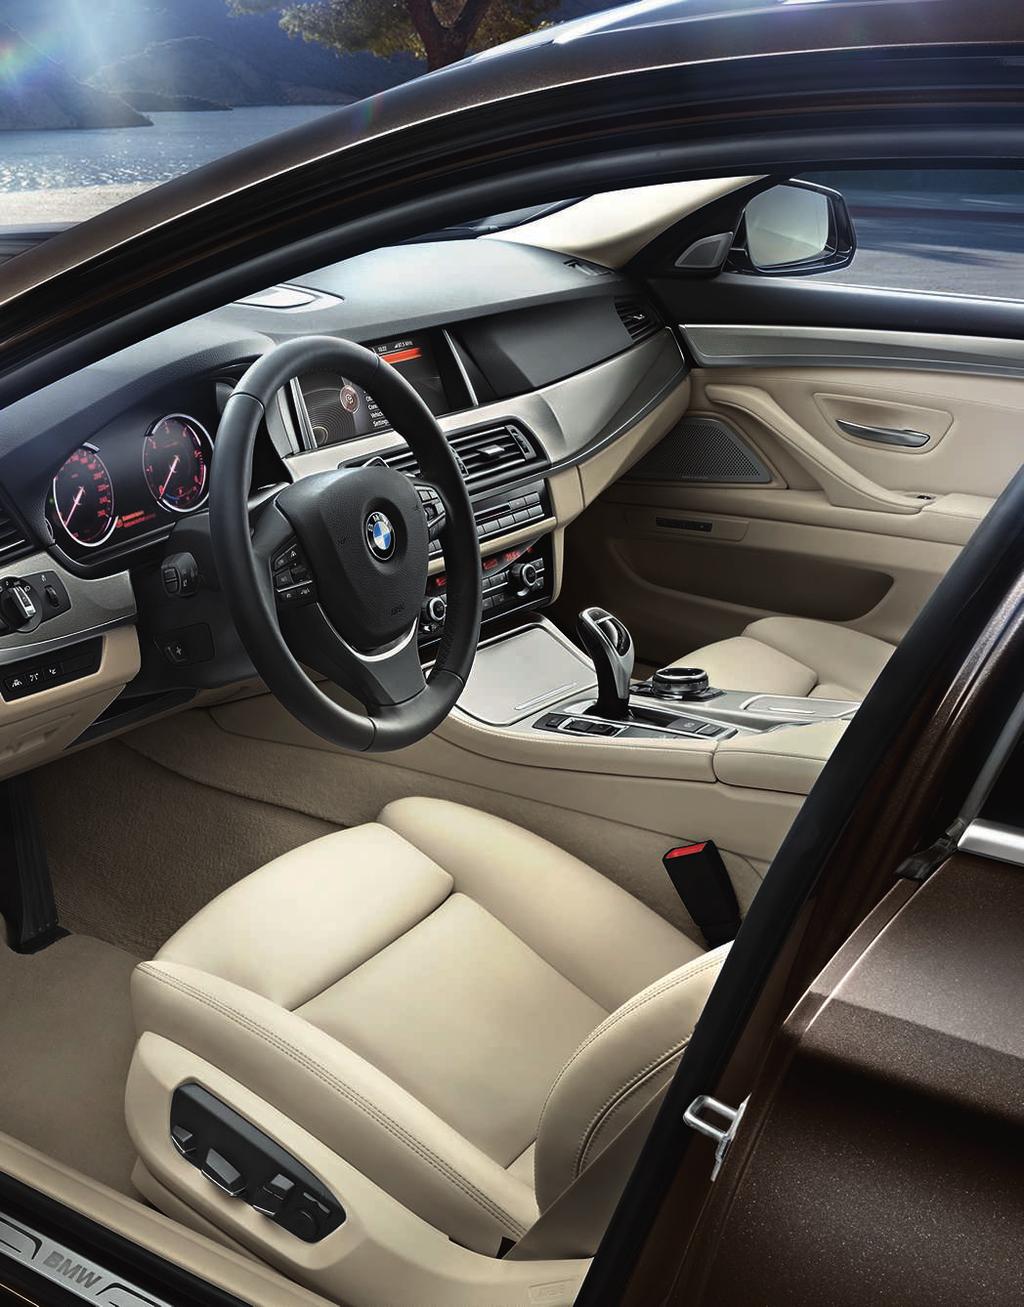 With optional BMW Professional Multimedia navigation system, the new idrive Touch